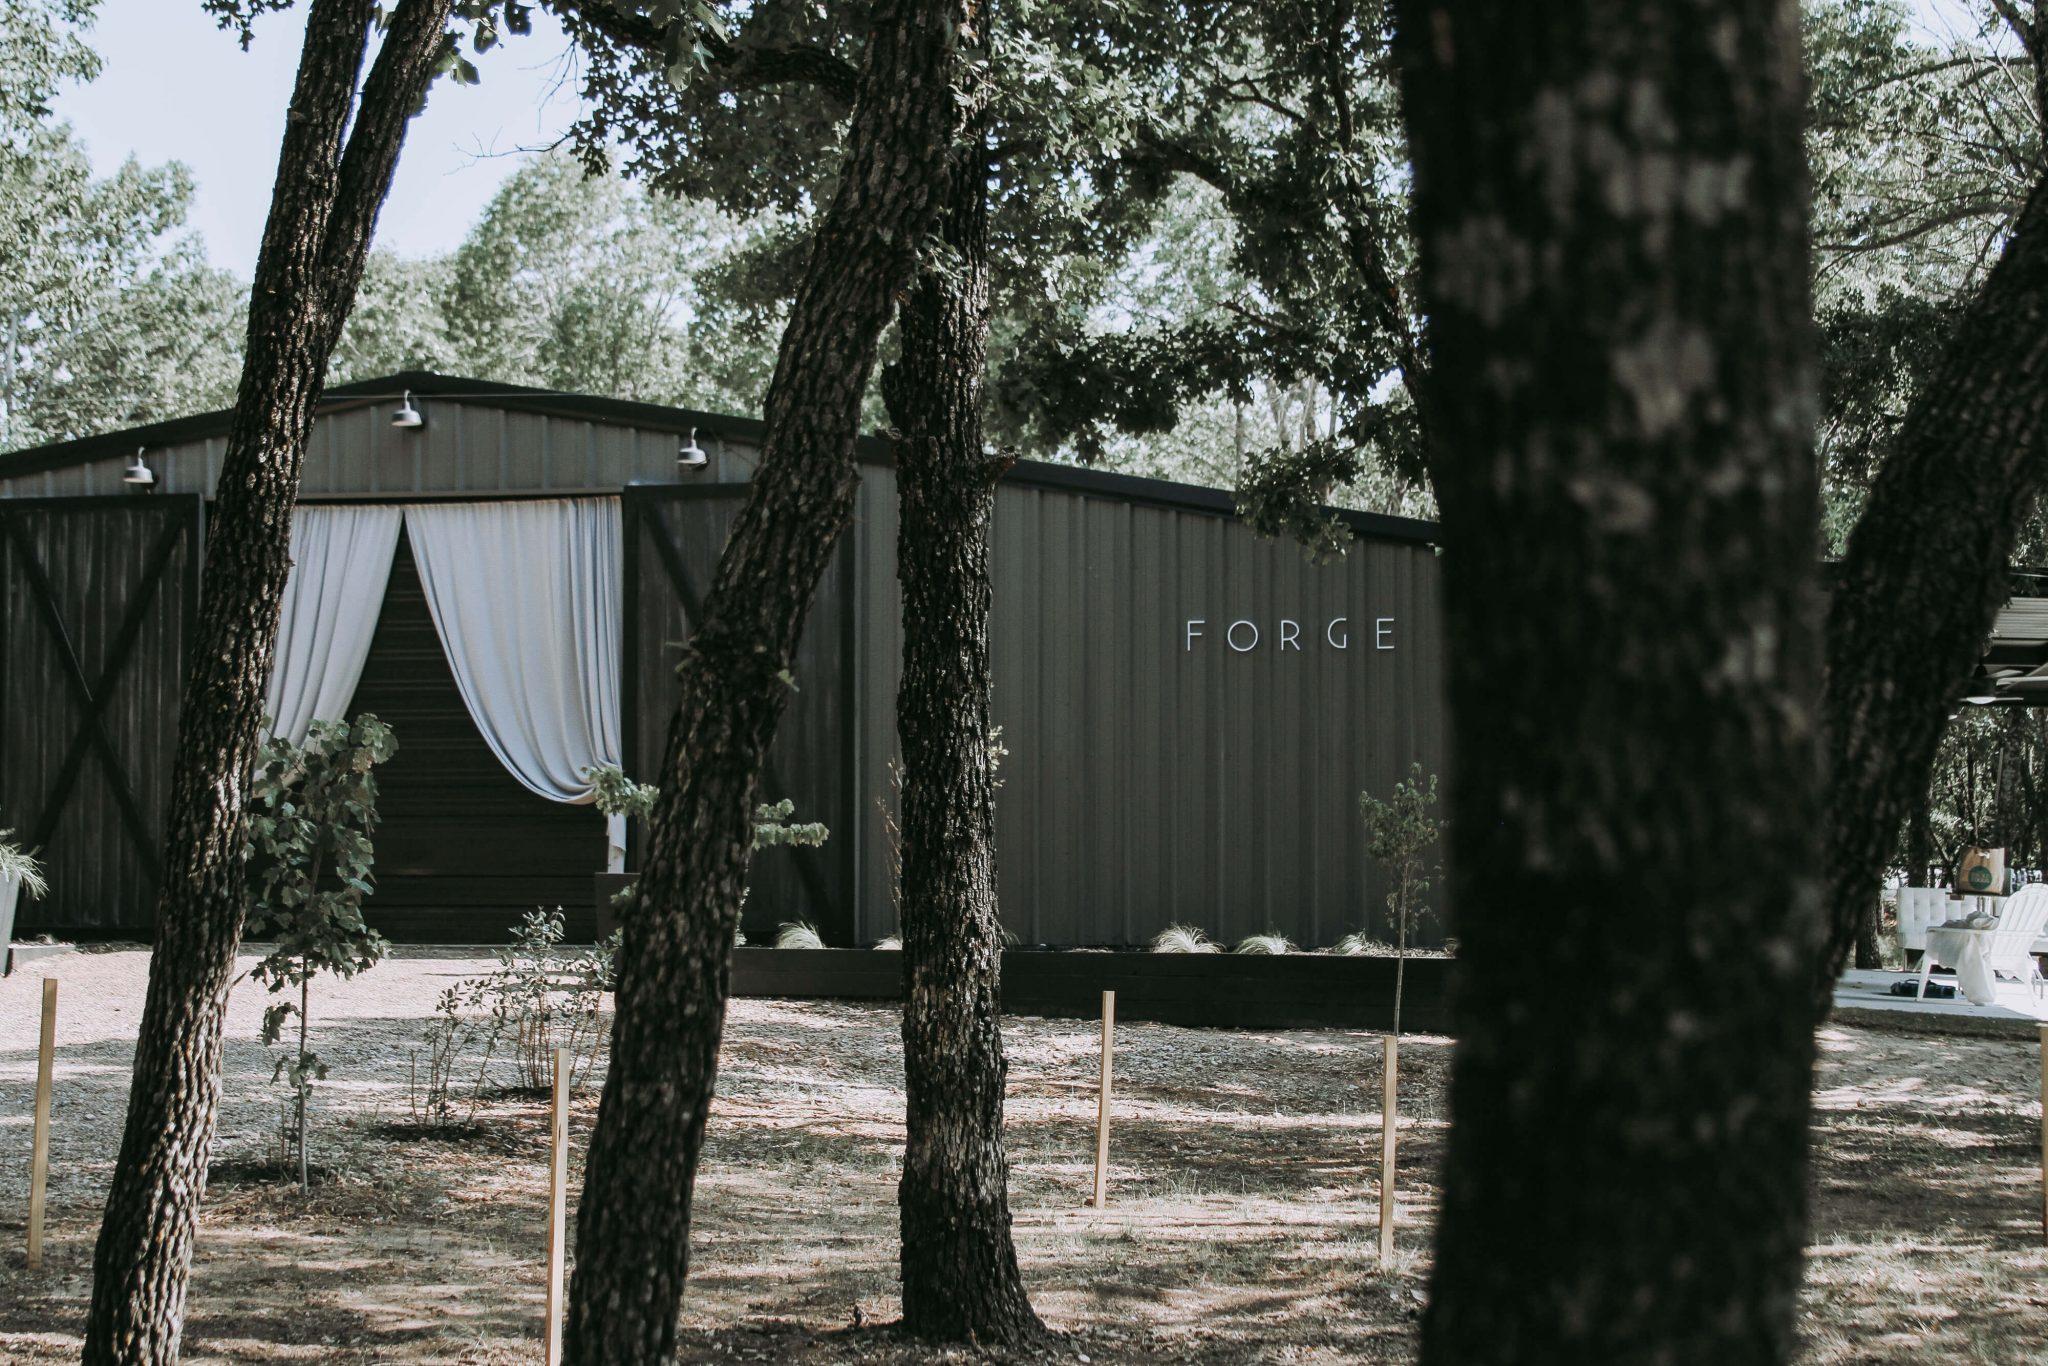 Looking for the perfect mix of industrial, modern, and country? The Forge Wedding Venue is an intimate, industrial space out in the open country near Dallas Fort Worth, Texas